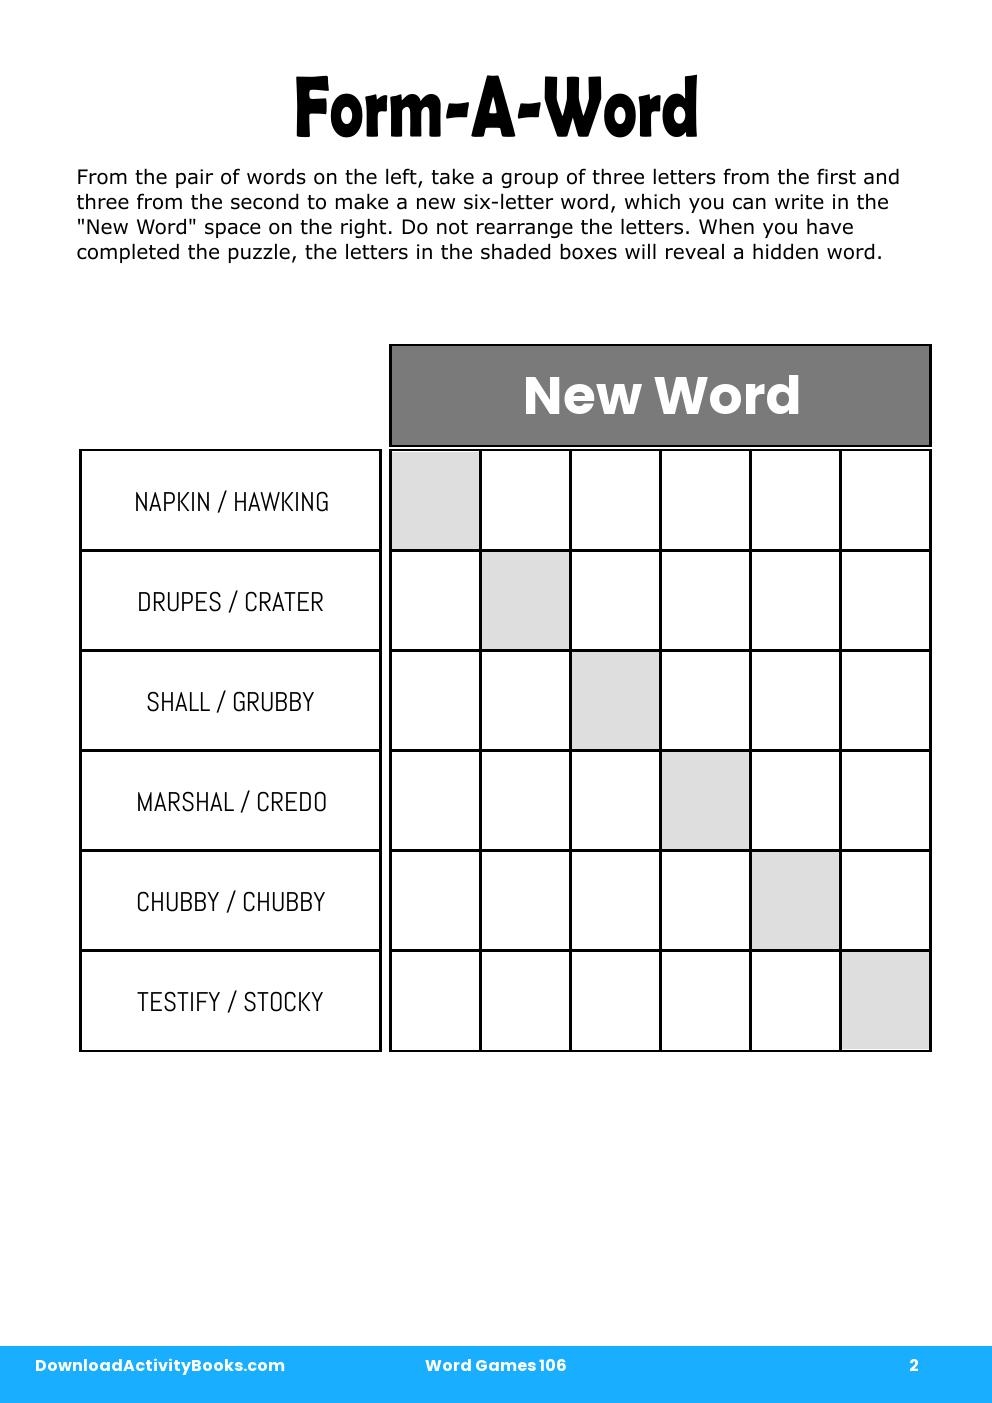 Form-A-Word in Word Games 106